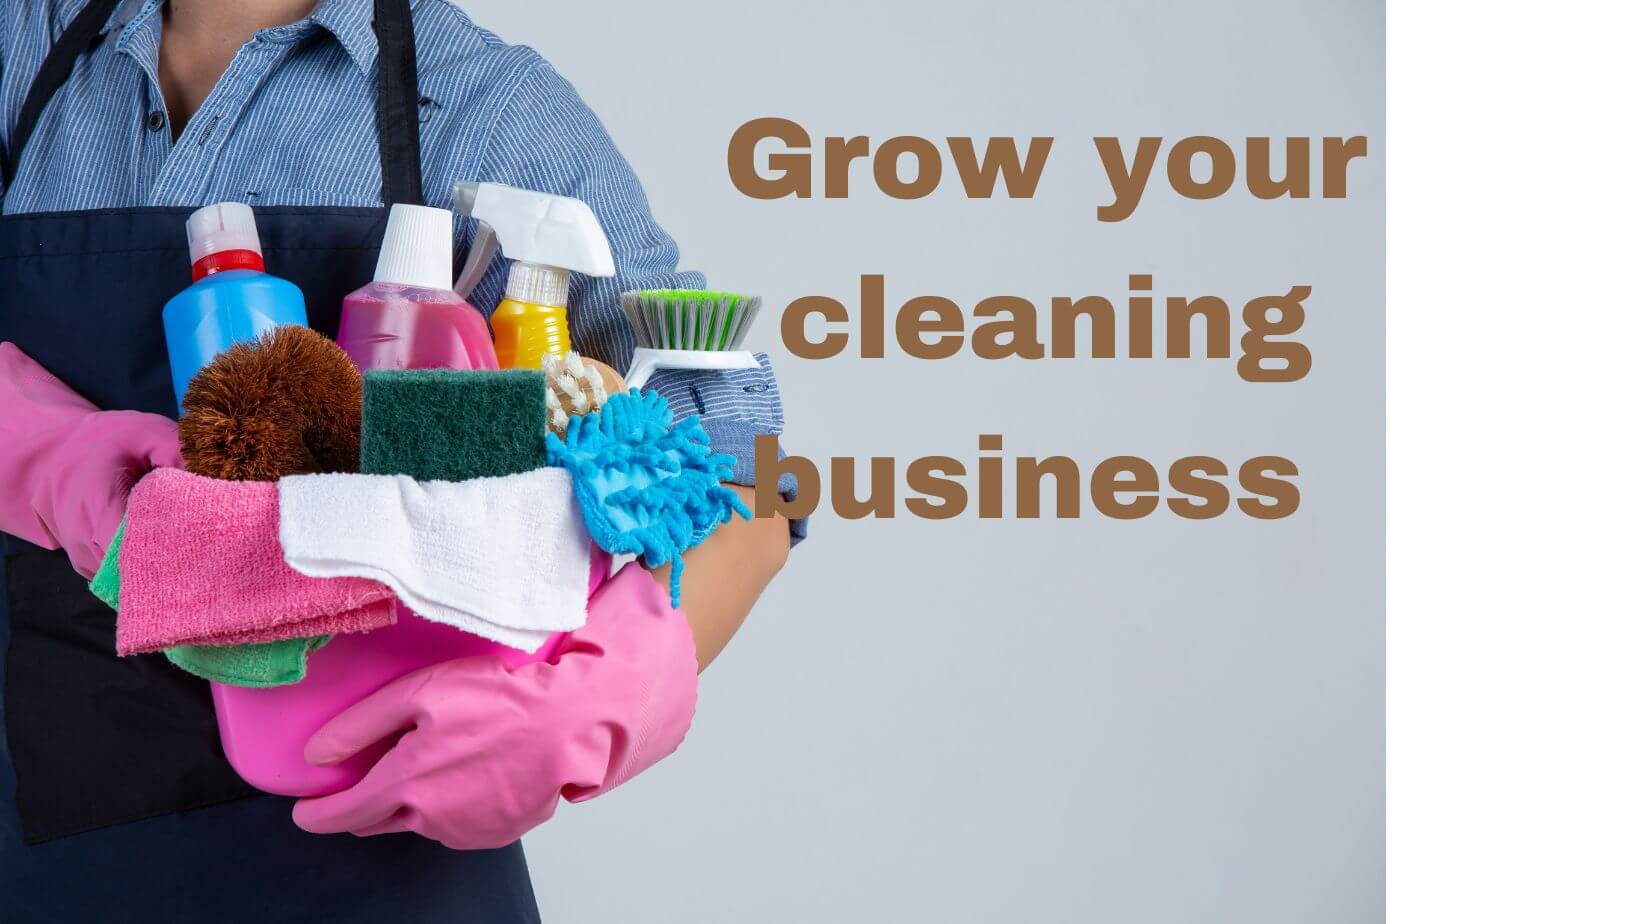 Grow your cleaning business using these websites